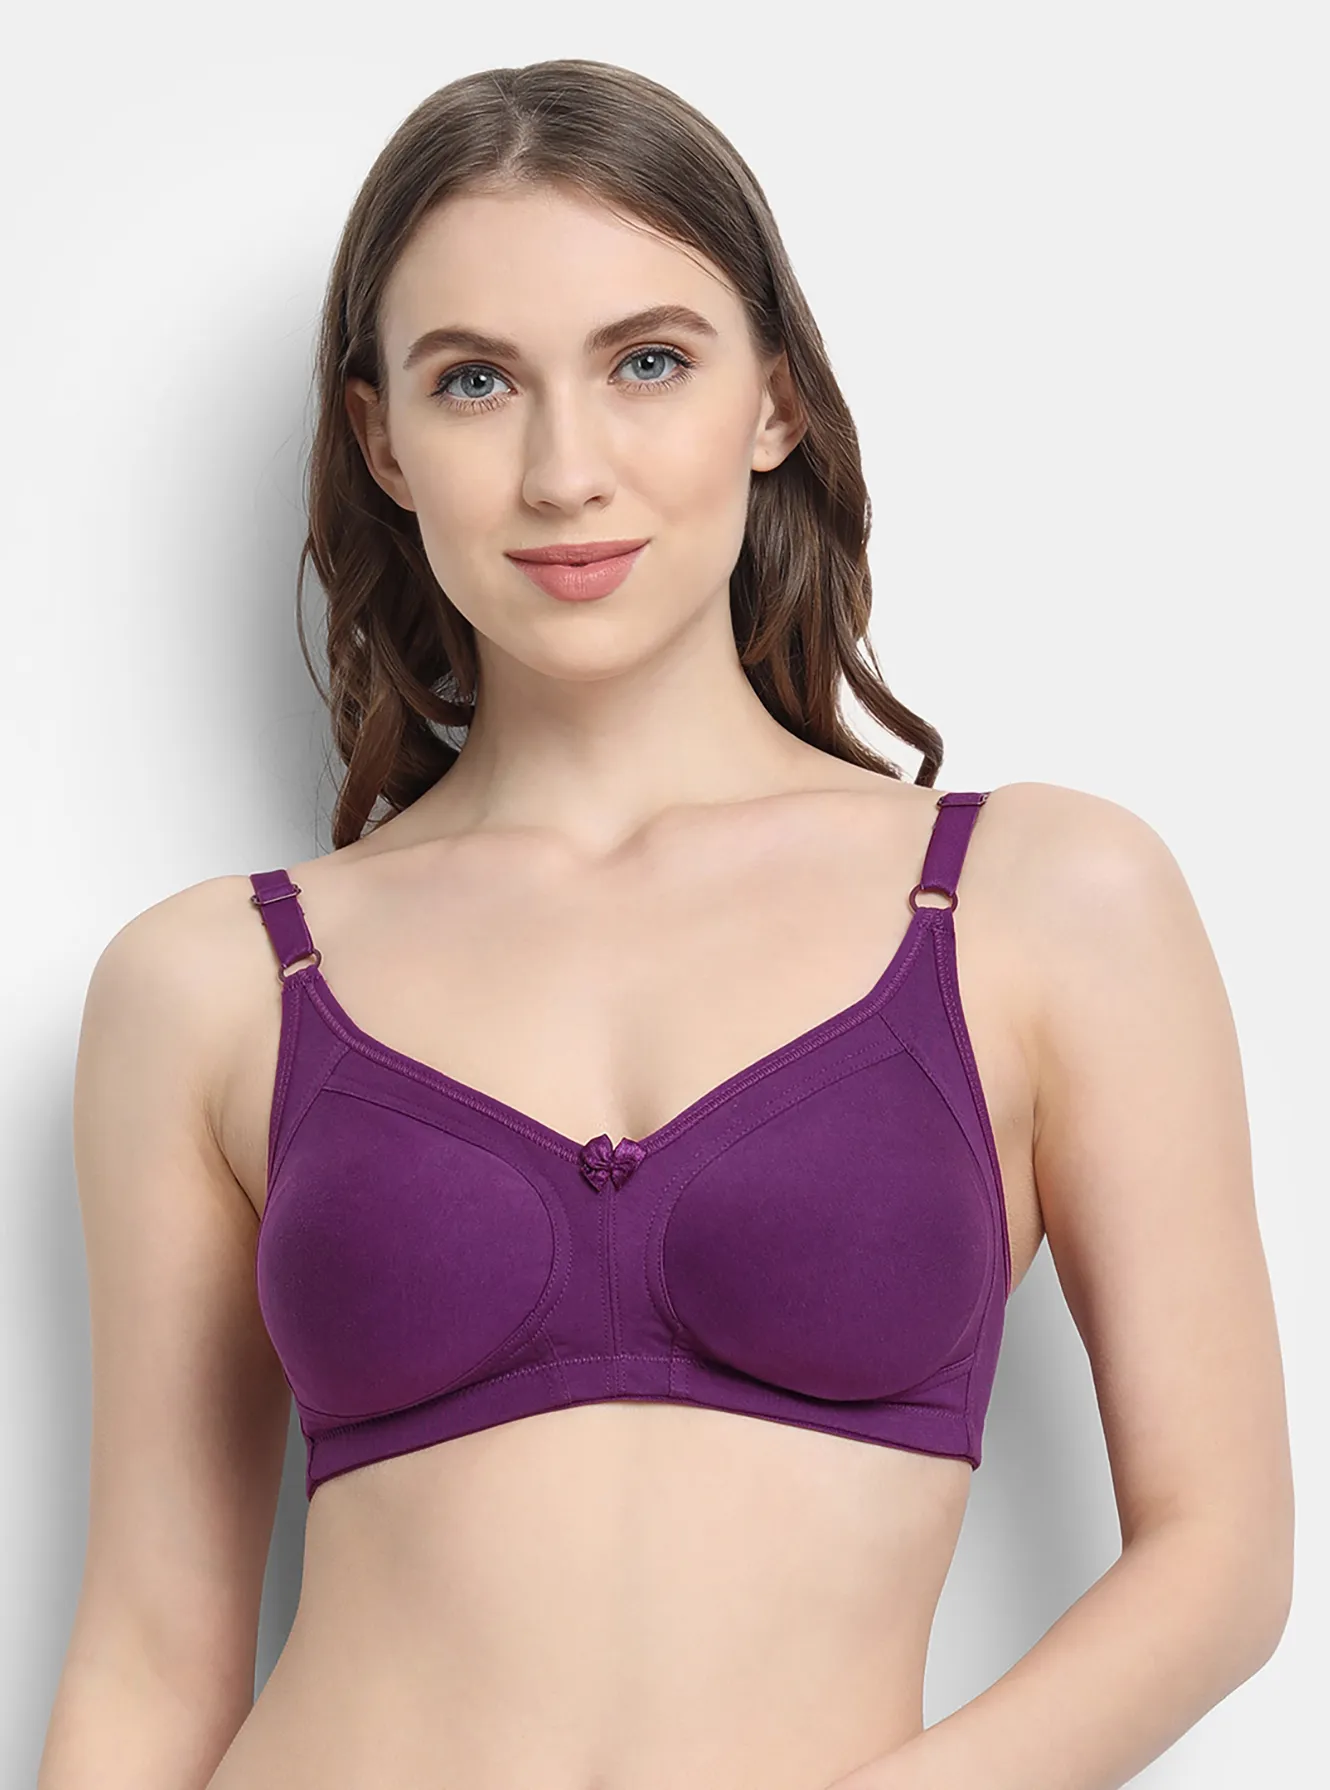 Double Layered Moulded Cups Plain Cotton Bra For Ladies, Purple Color, Inner  Wear Size: Available In Many Different Size at Best Price in Ernakulam